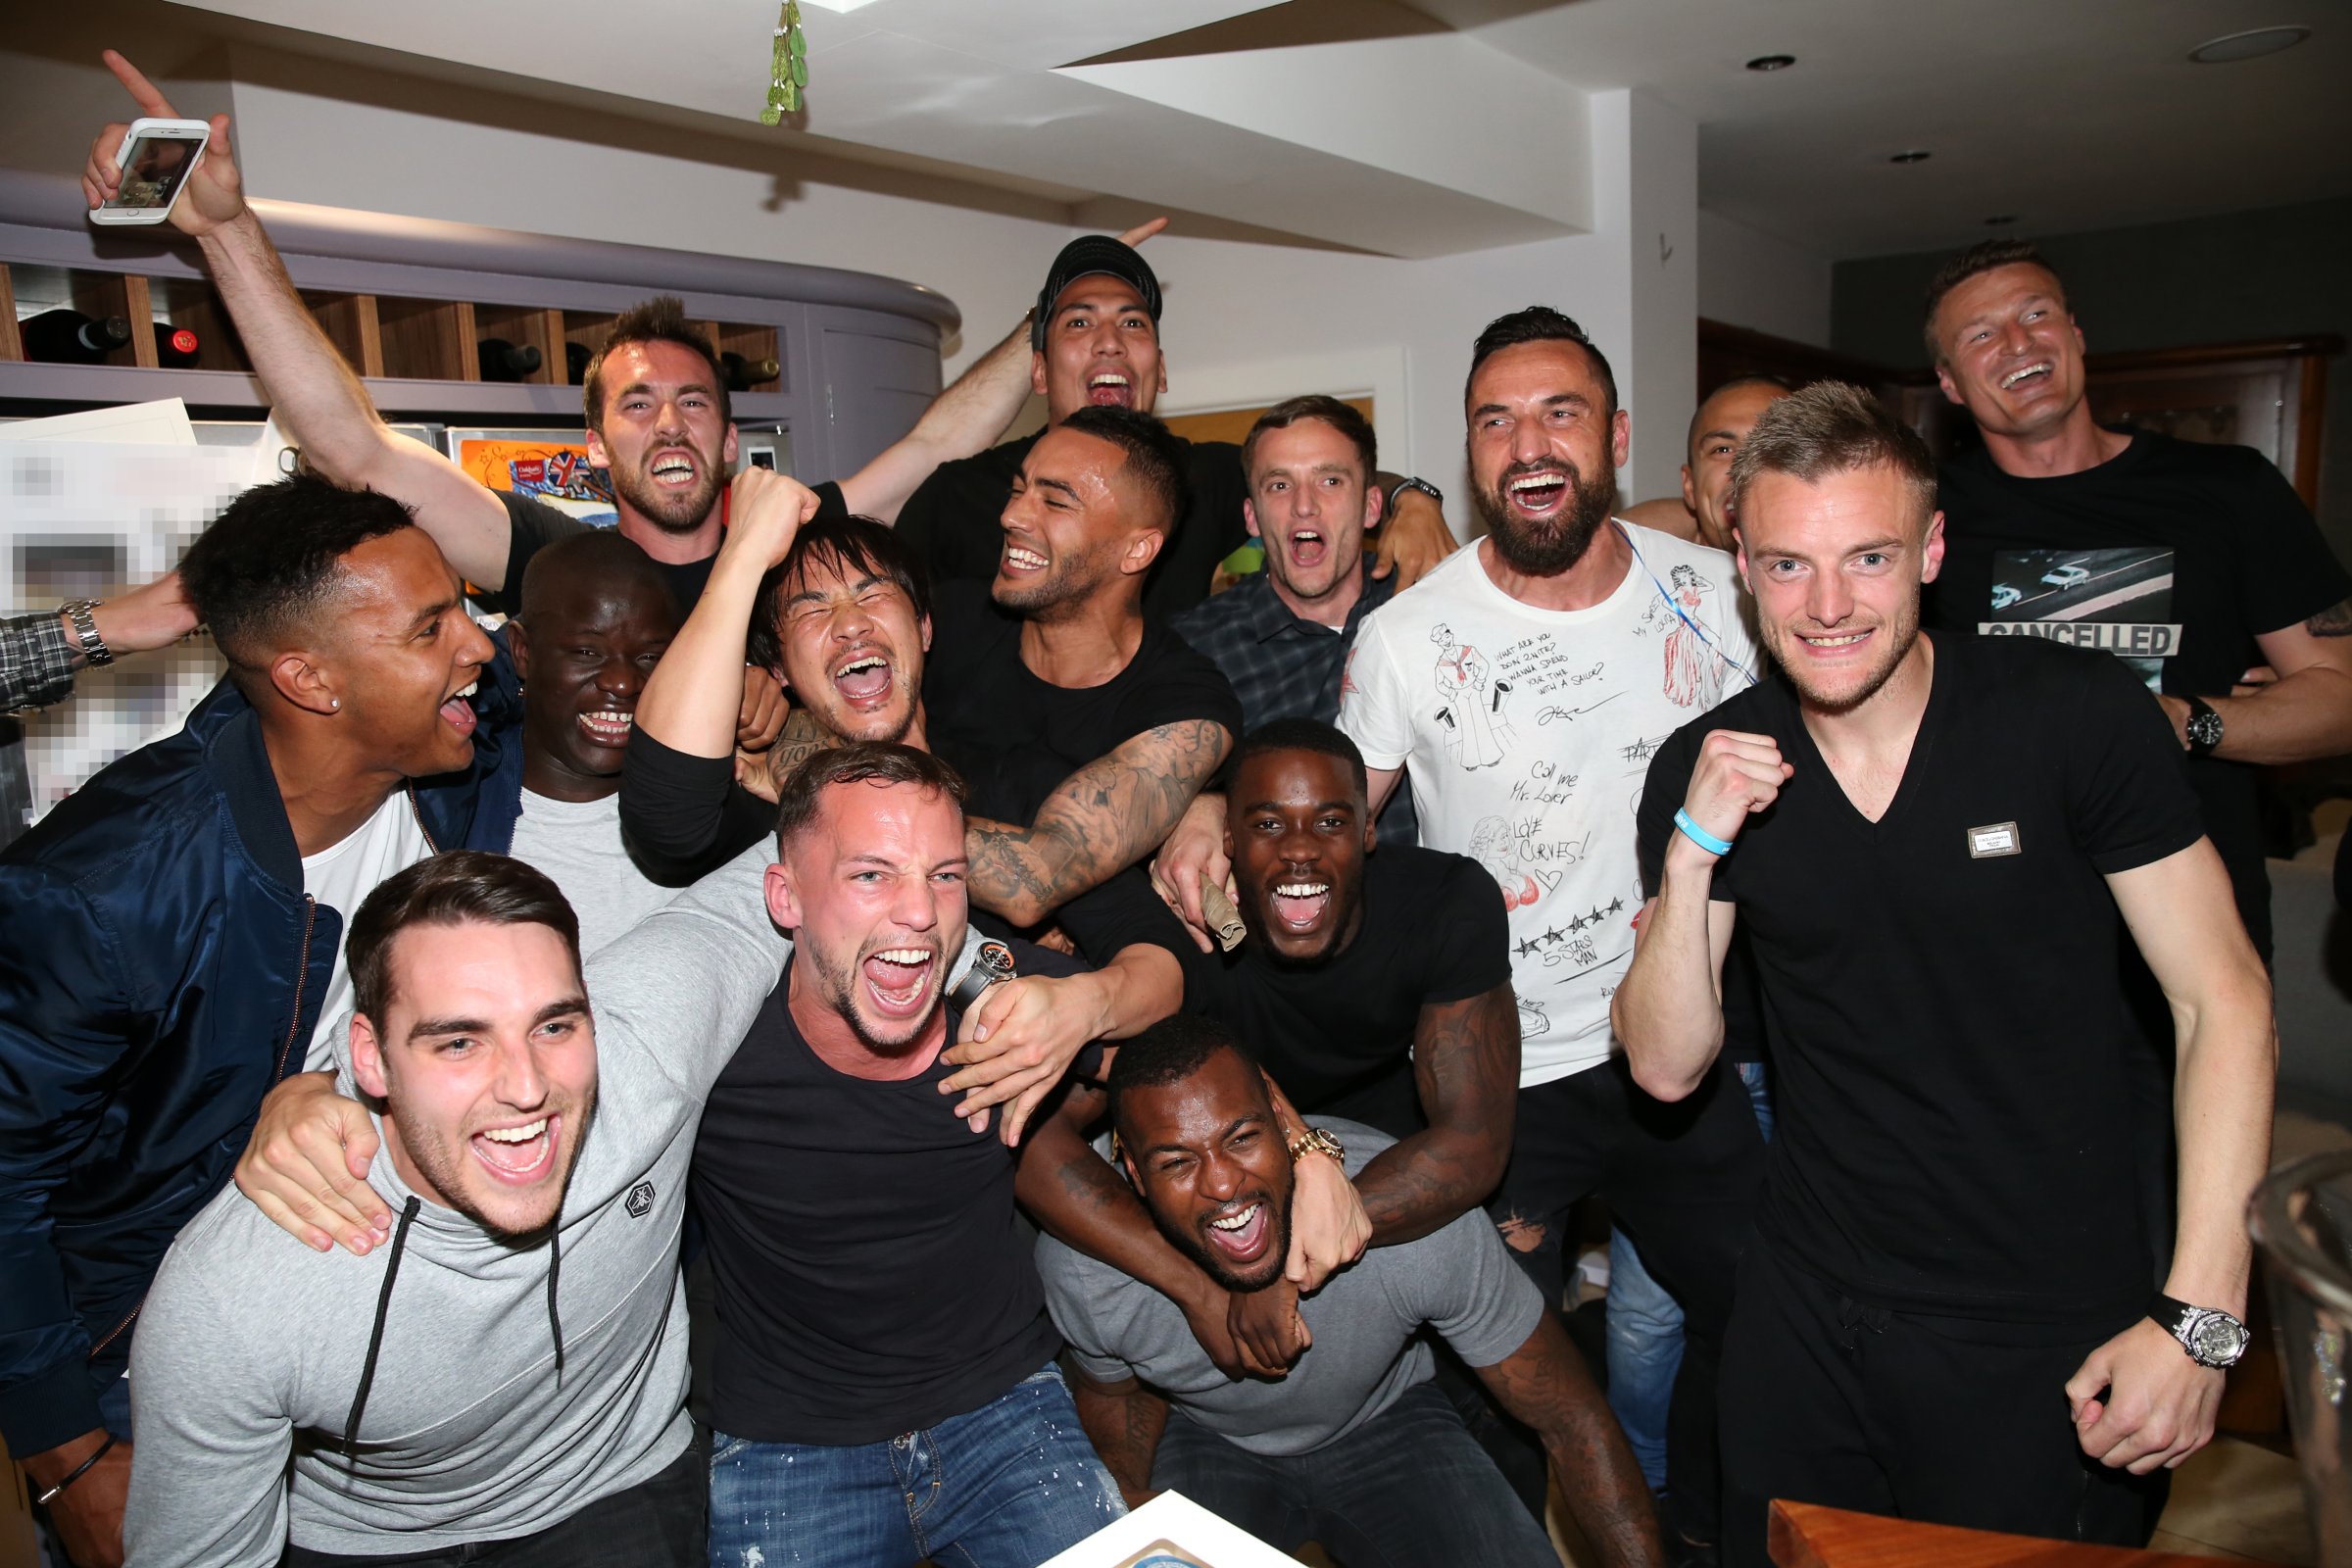 Settle down boys: Players on the champion Leicester City Football Club watch rivals on TV during their championship run.